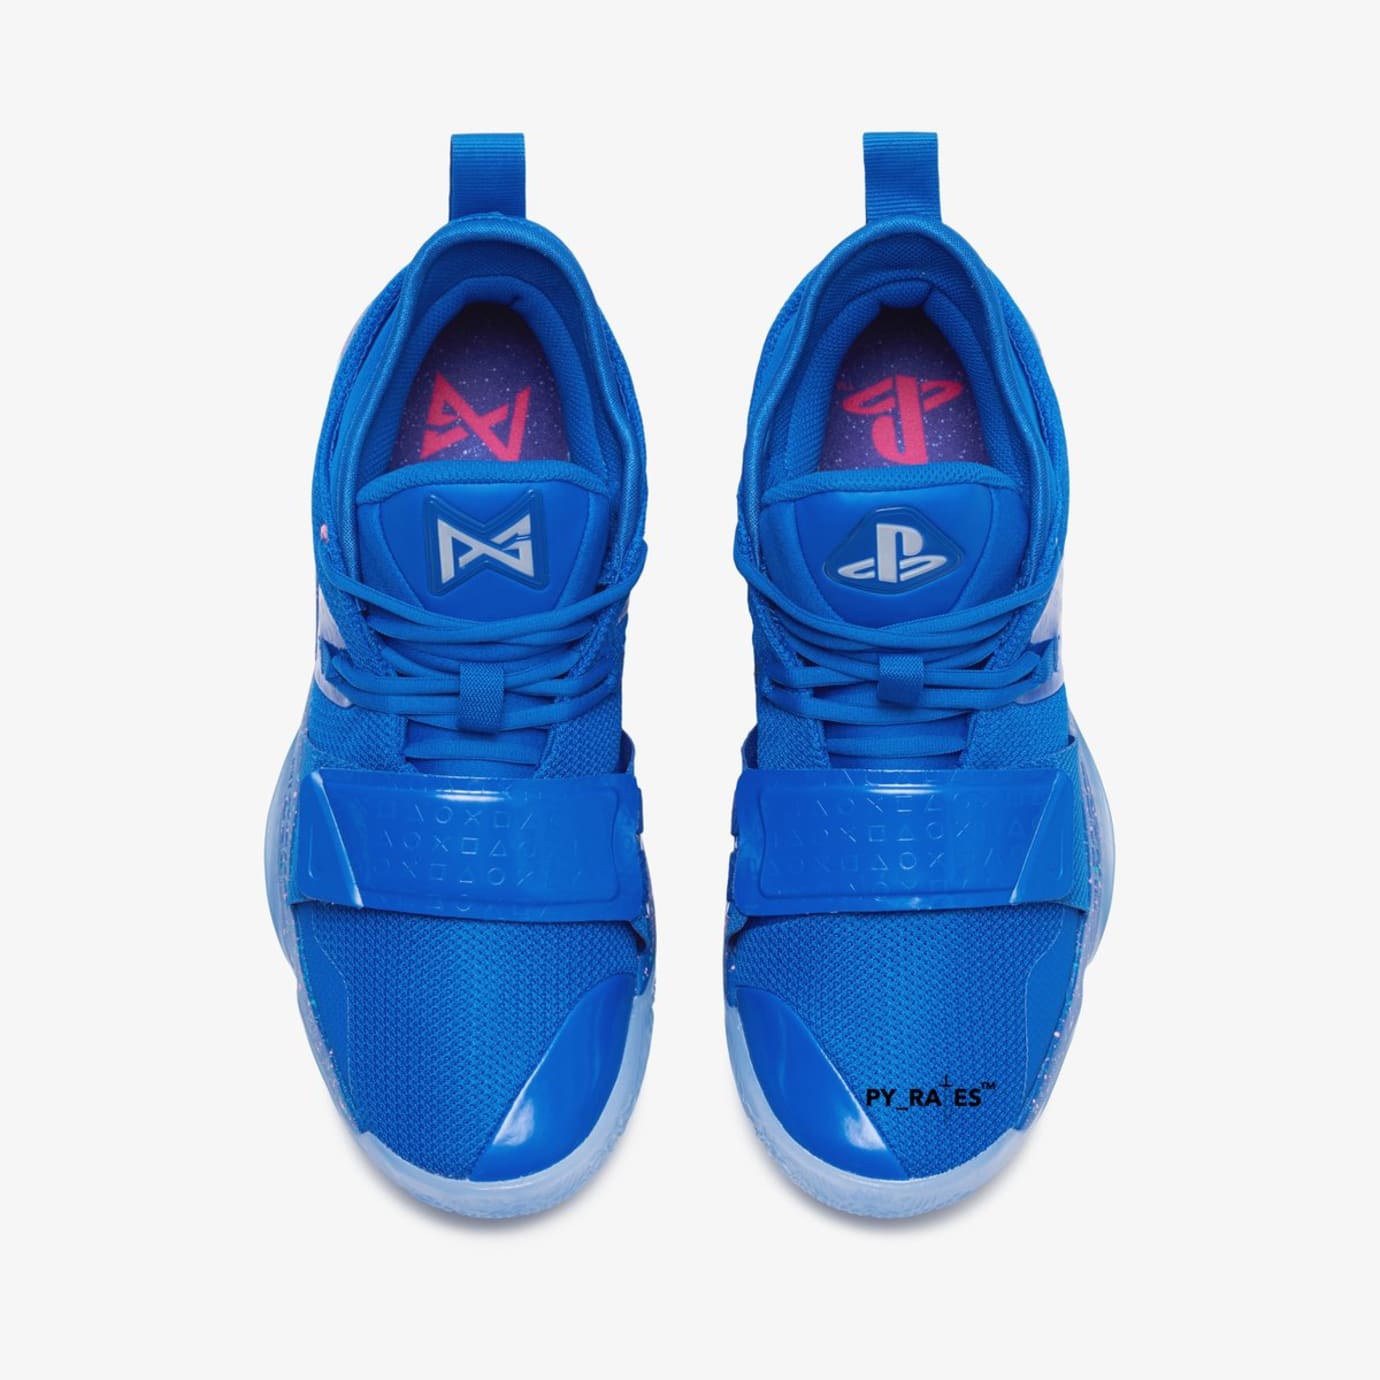 Playstation x Nike PG 2.5 'Blue/Multi-Color' Release Date | Sole Collector